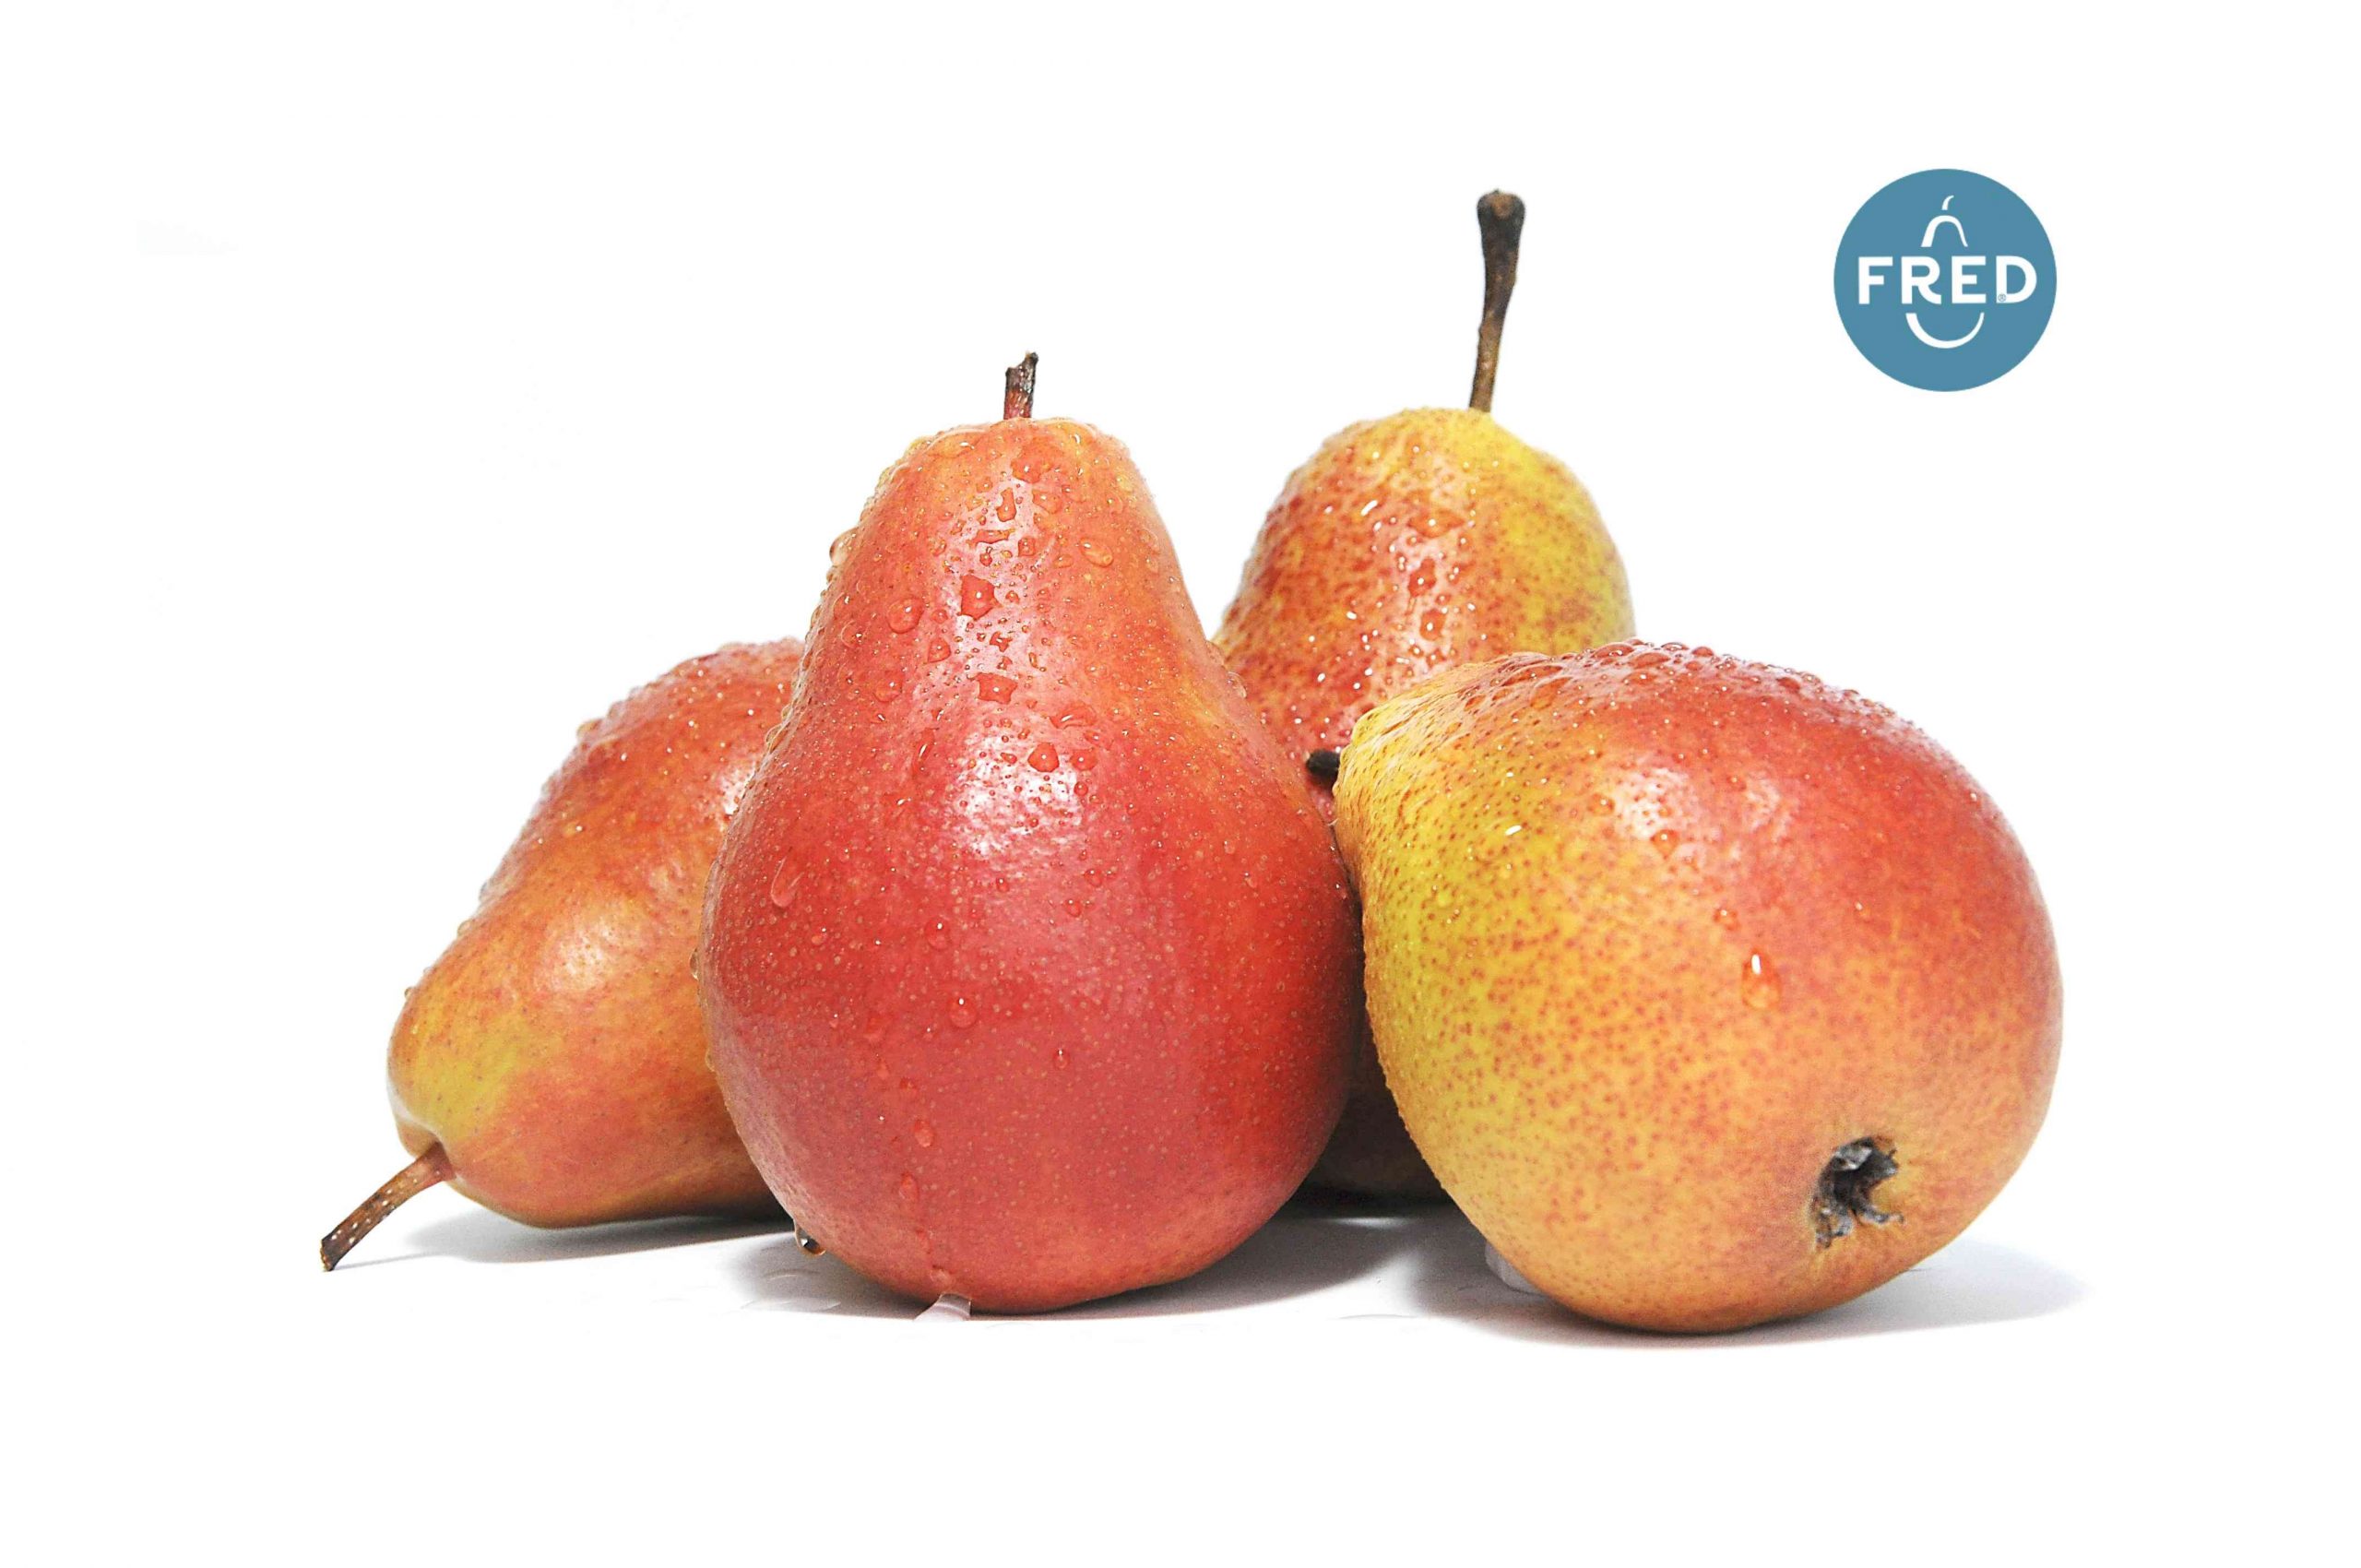 Fred pear by Origine Group